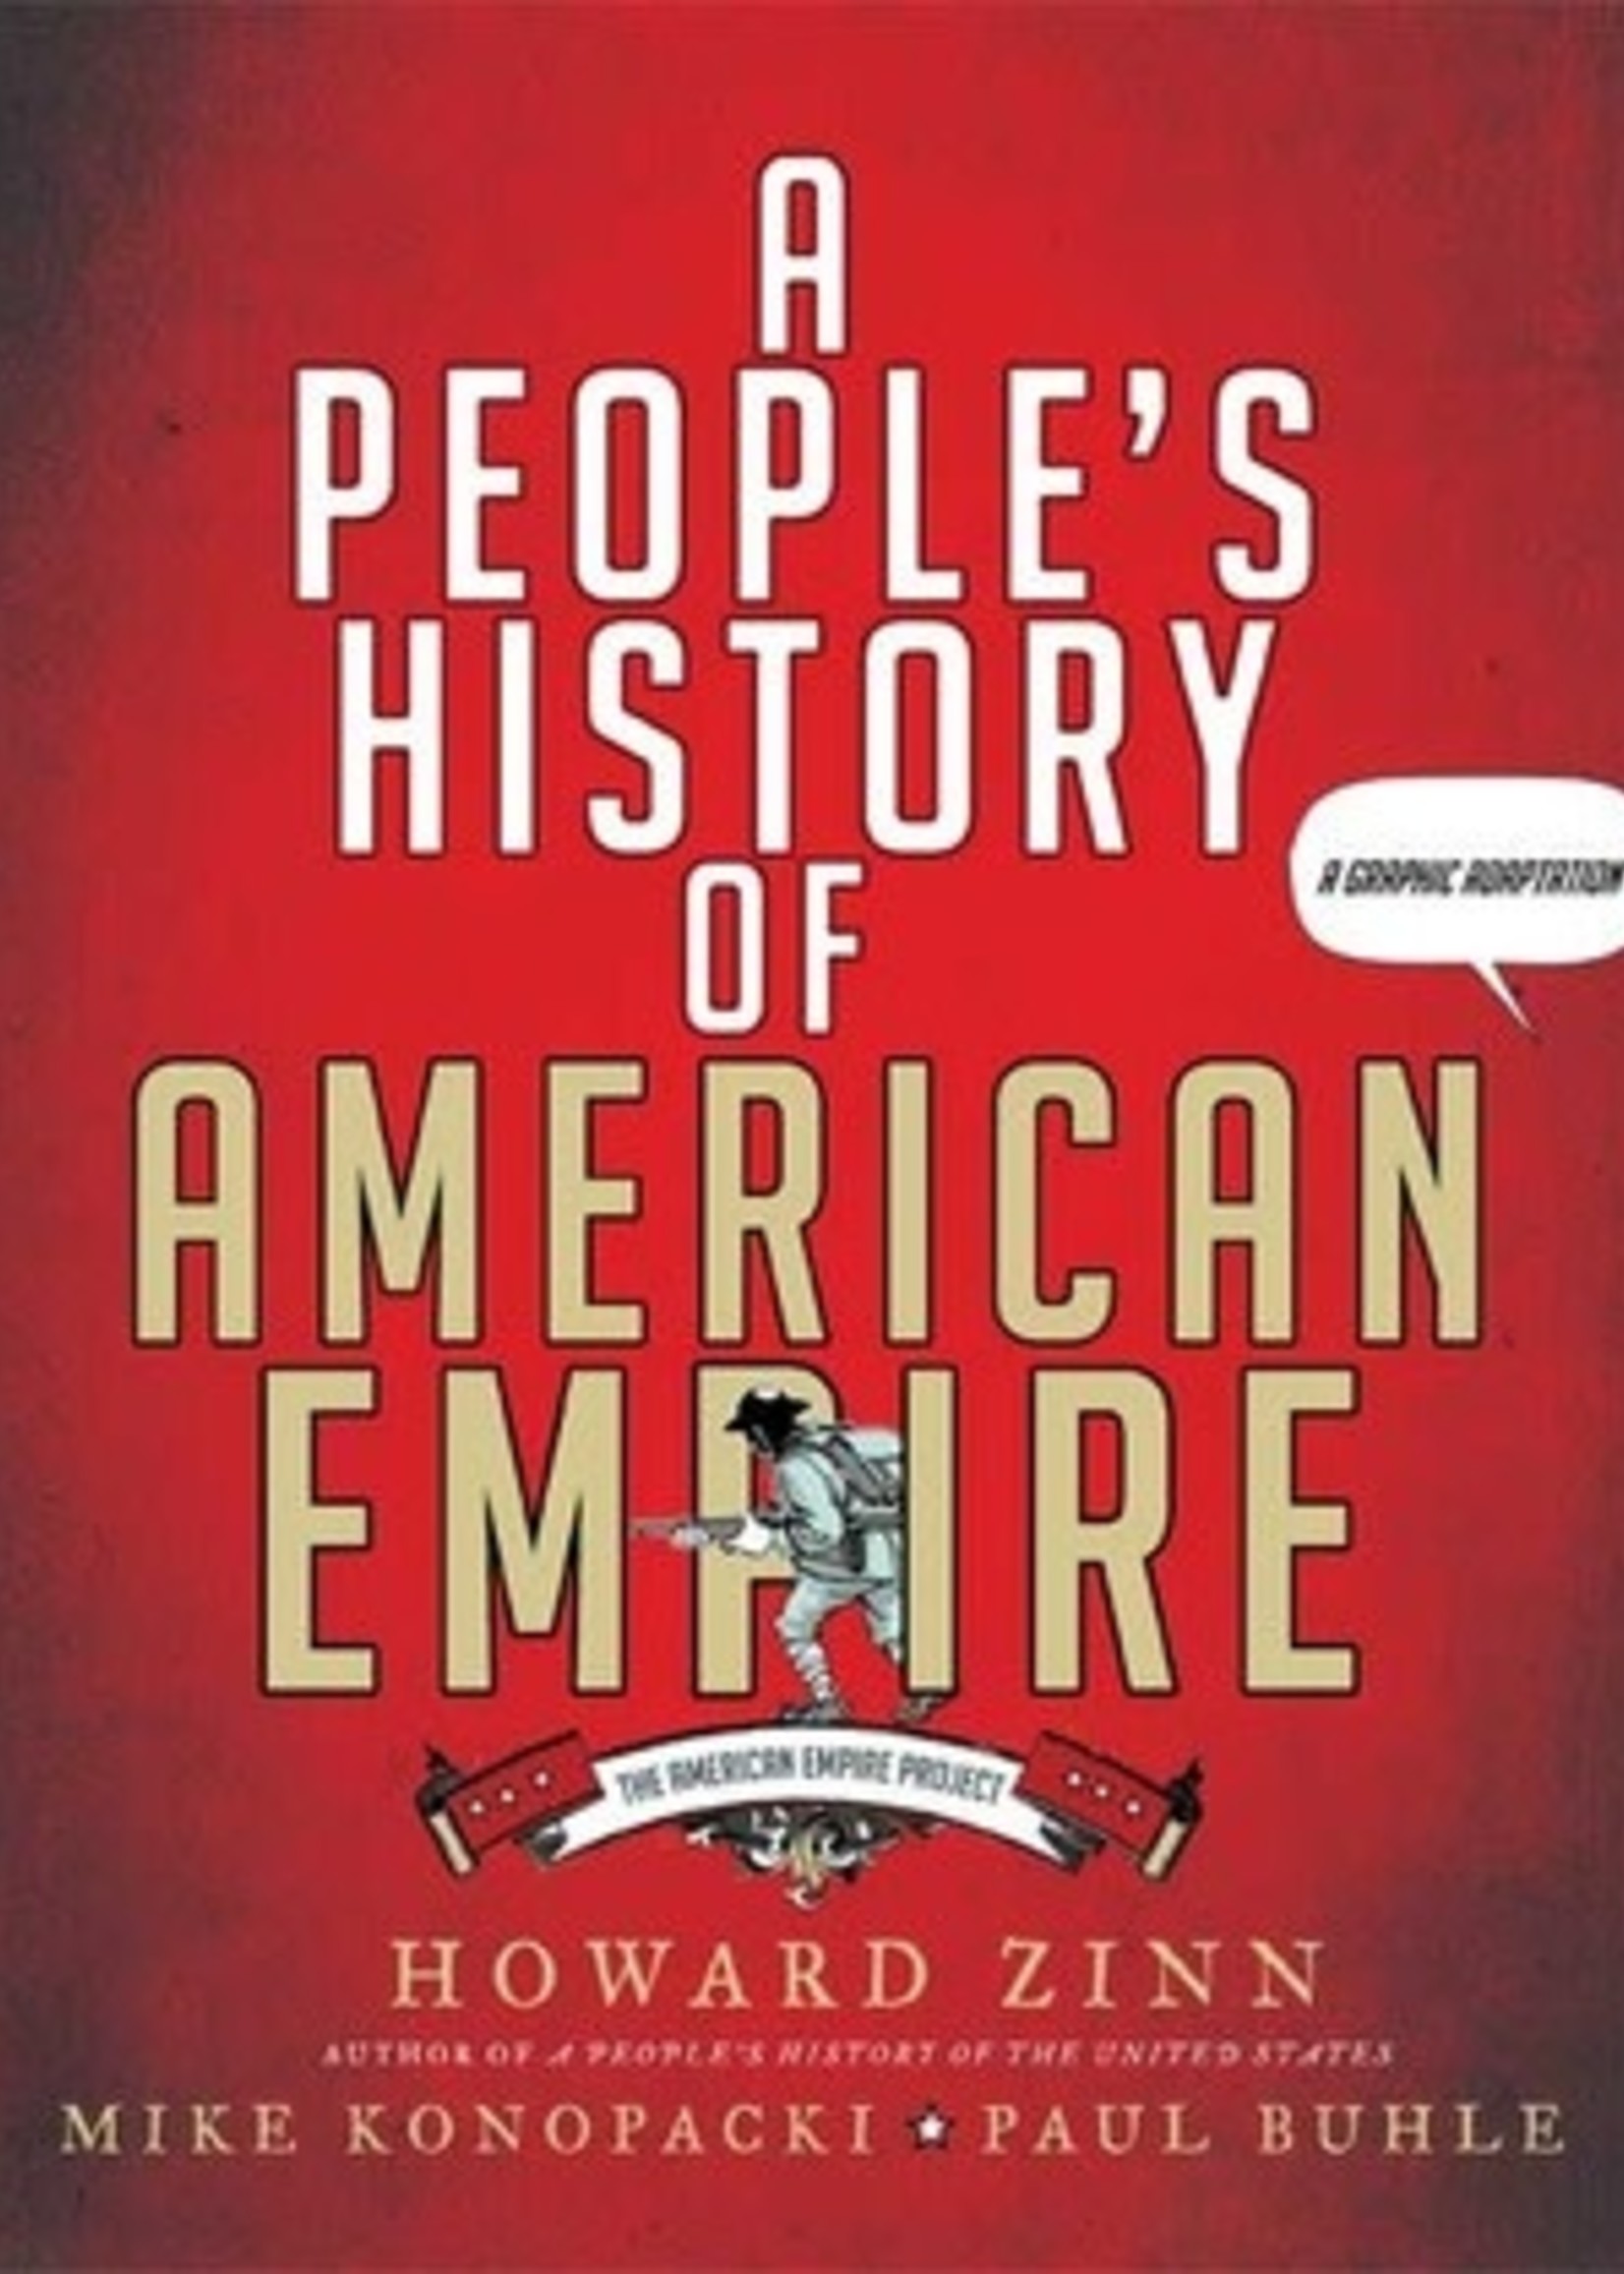 A People's History of American Empire by Paul M. Buhle, Howard Zinn, Mike Konopacki, Dave Wagner